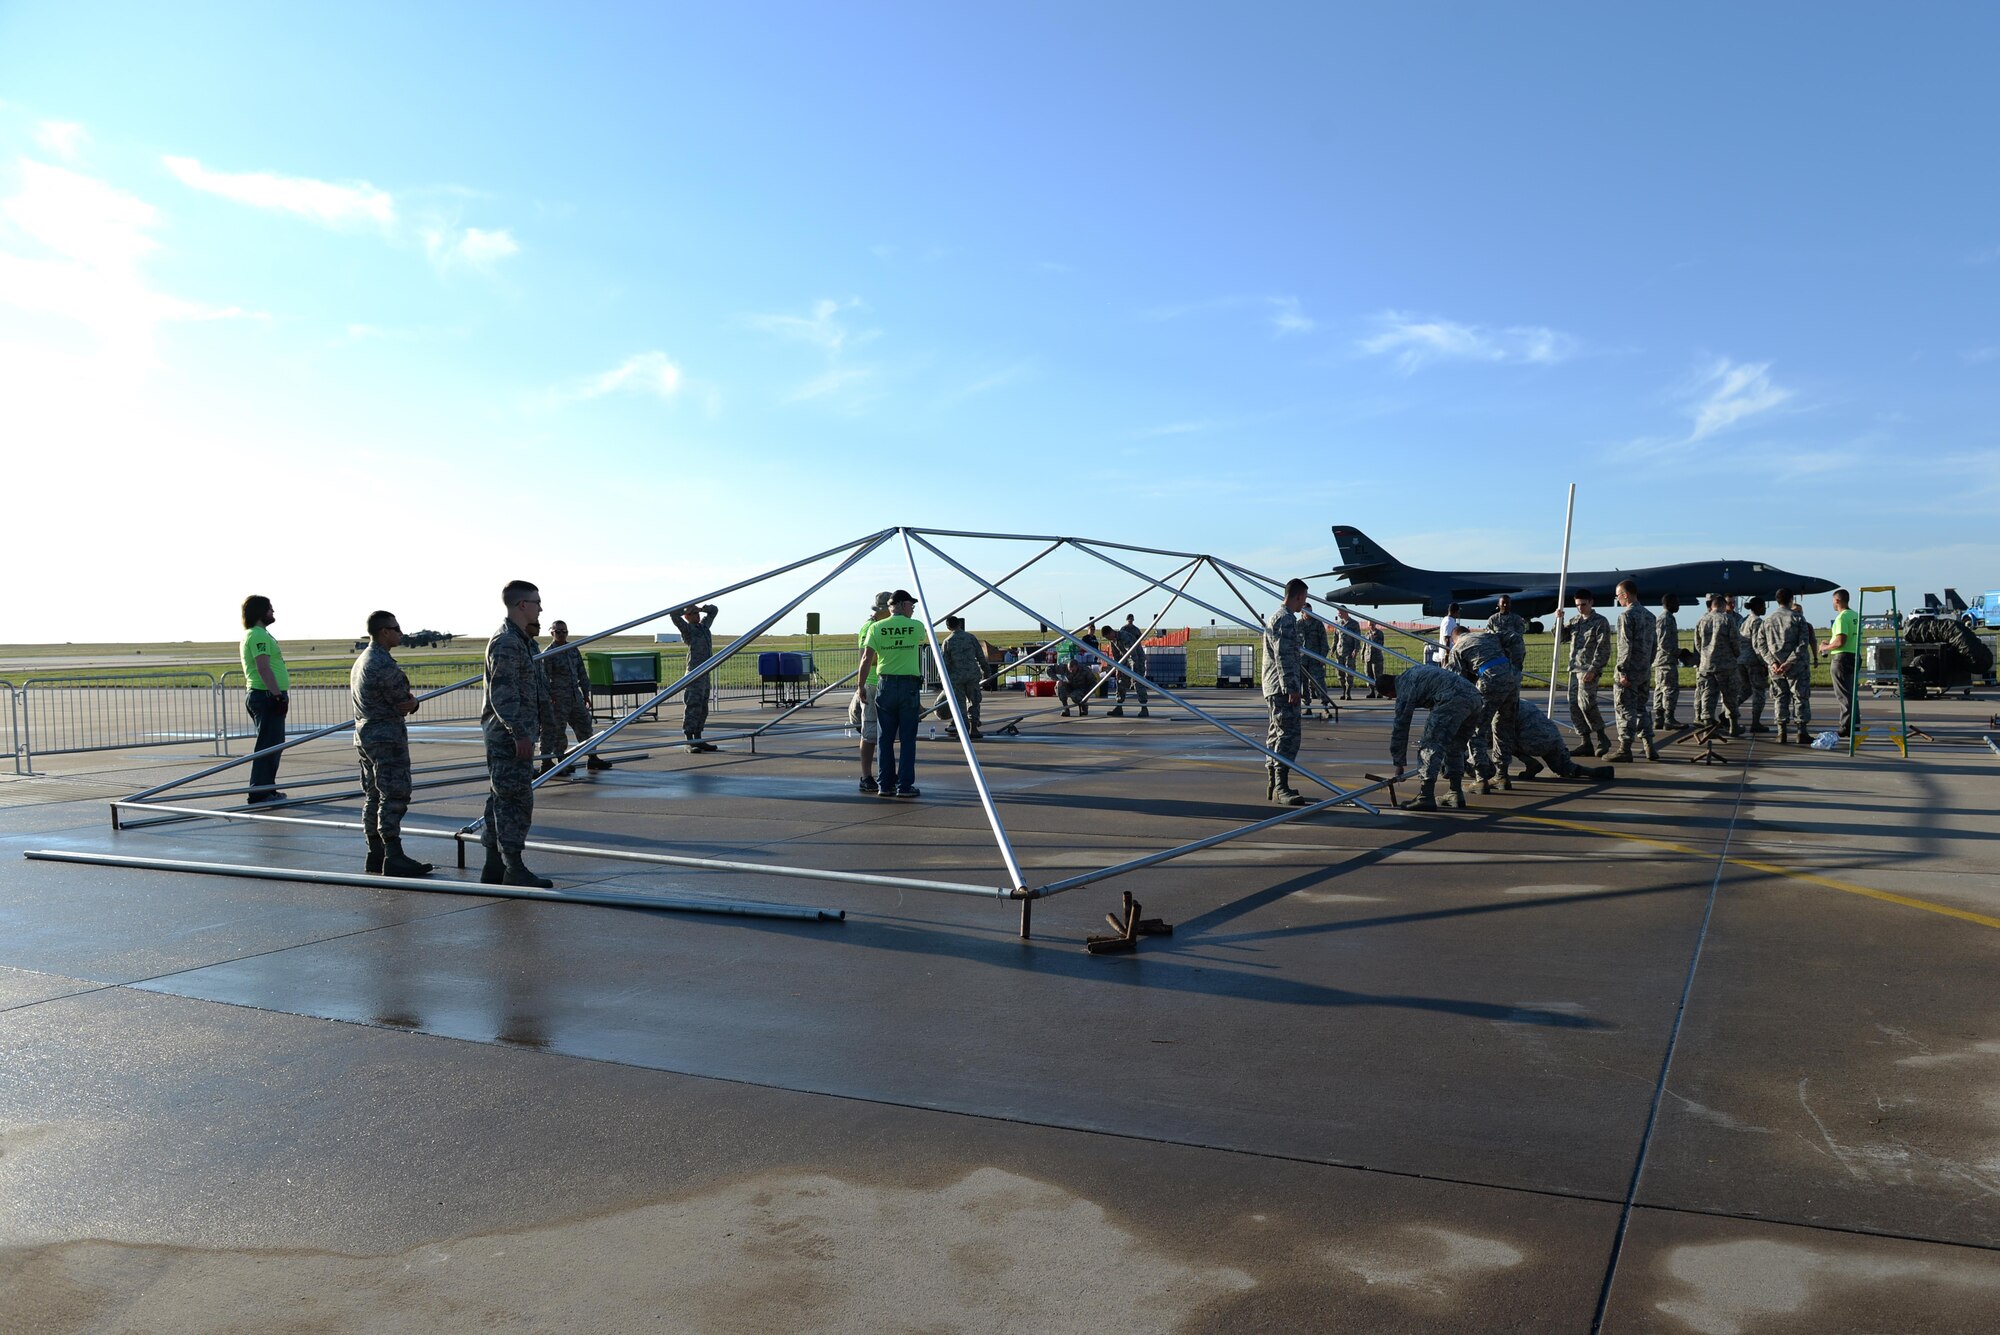 U.S. Air Force Airmen help set up tent poles after a storm blew down nearly every tent for the Sheppard Air Force Base, Texas, Open House and Air Show, Sept. 18, 2016. More than 2,000 Airmen in Training gathered to help reset the base for the 75th Anniversary Air Show Celebration. (U.S. Air Force photo by Senior Airman Kyle E. Gese)